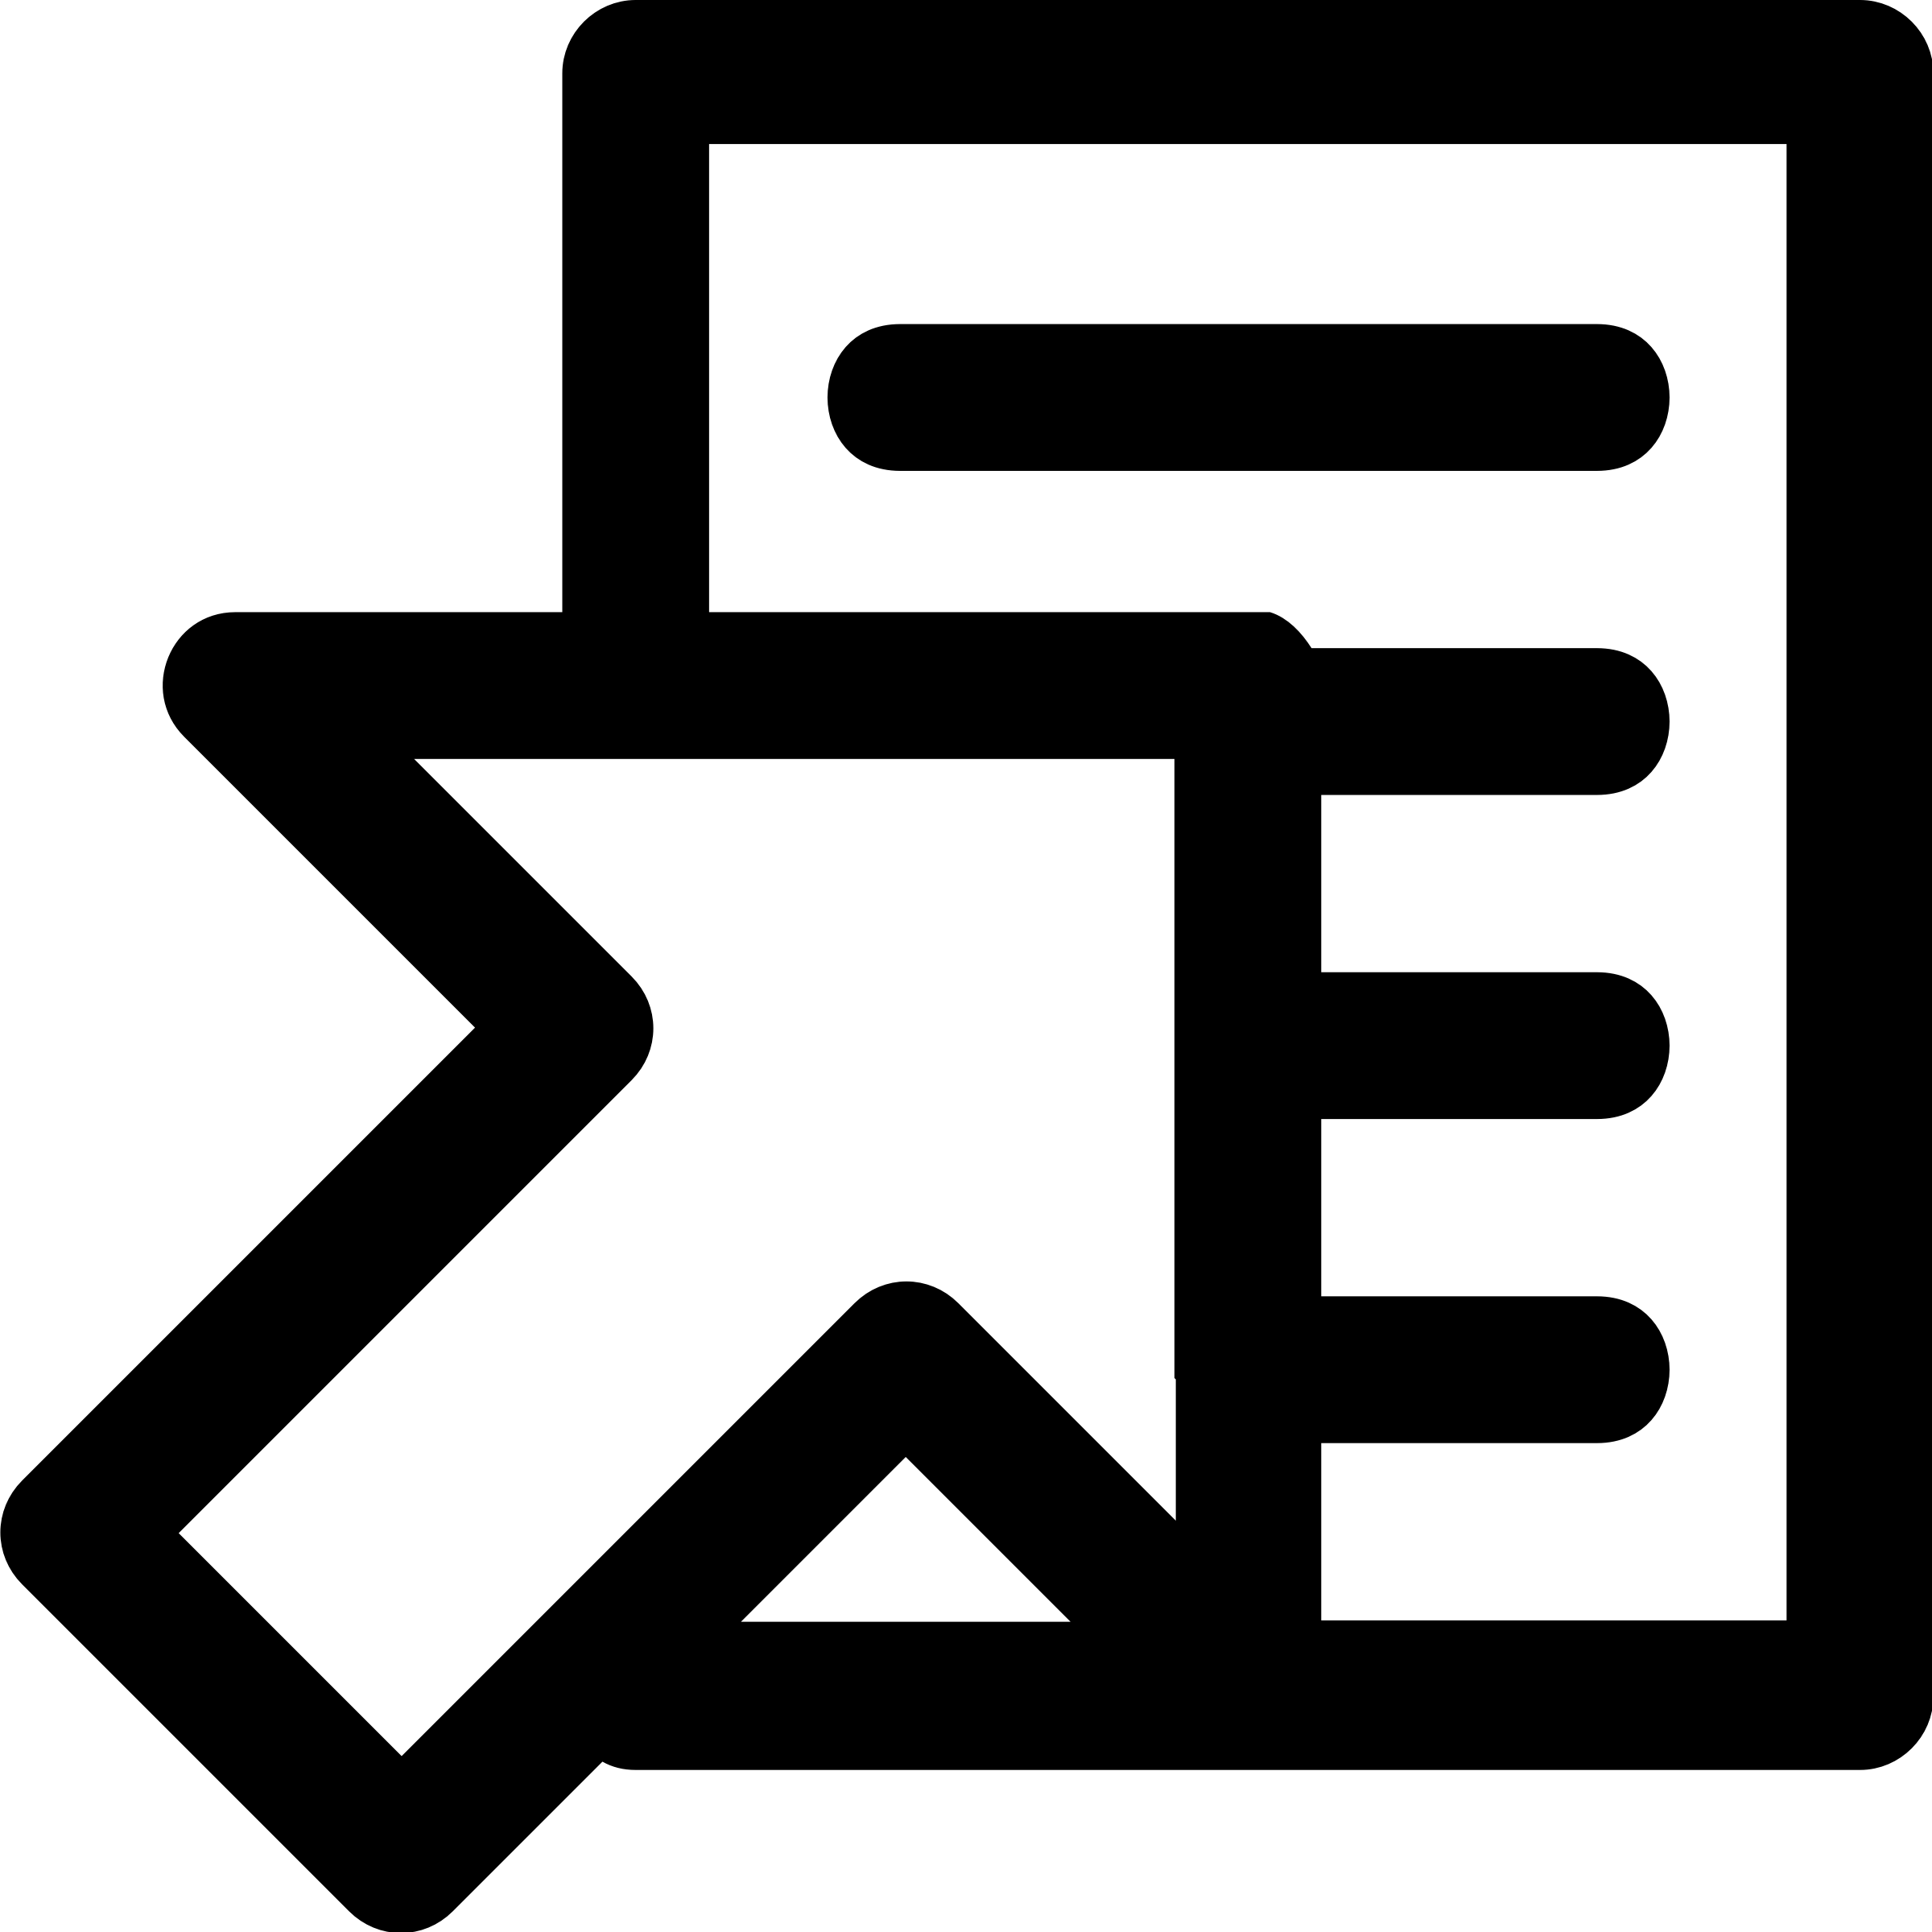 Iconic Star Document Symbol PNG image